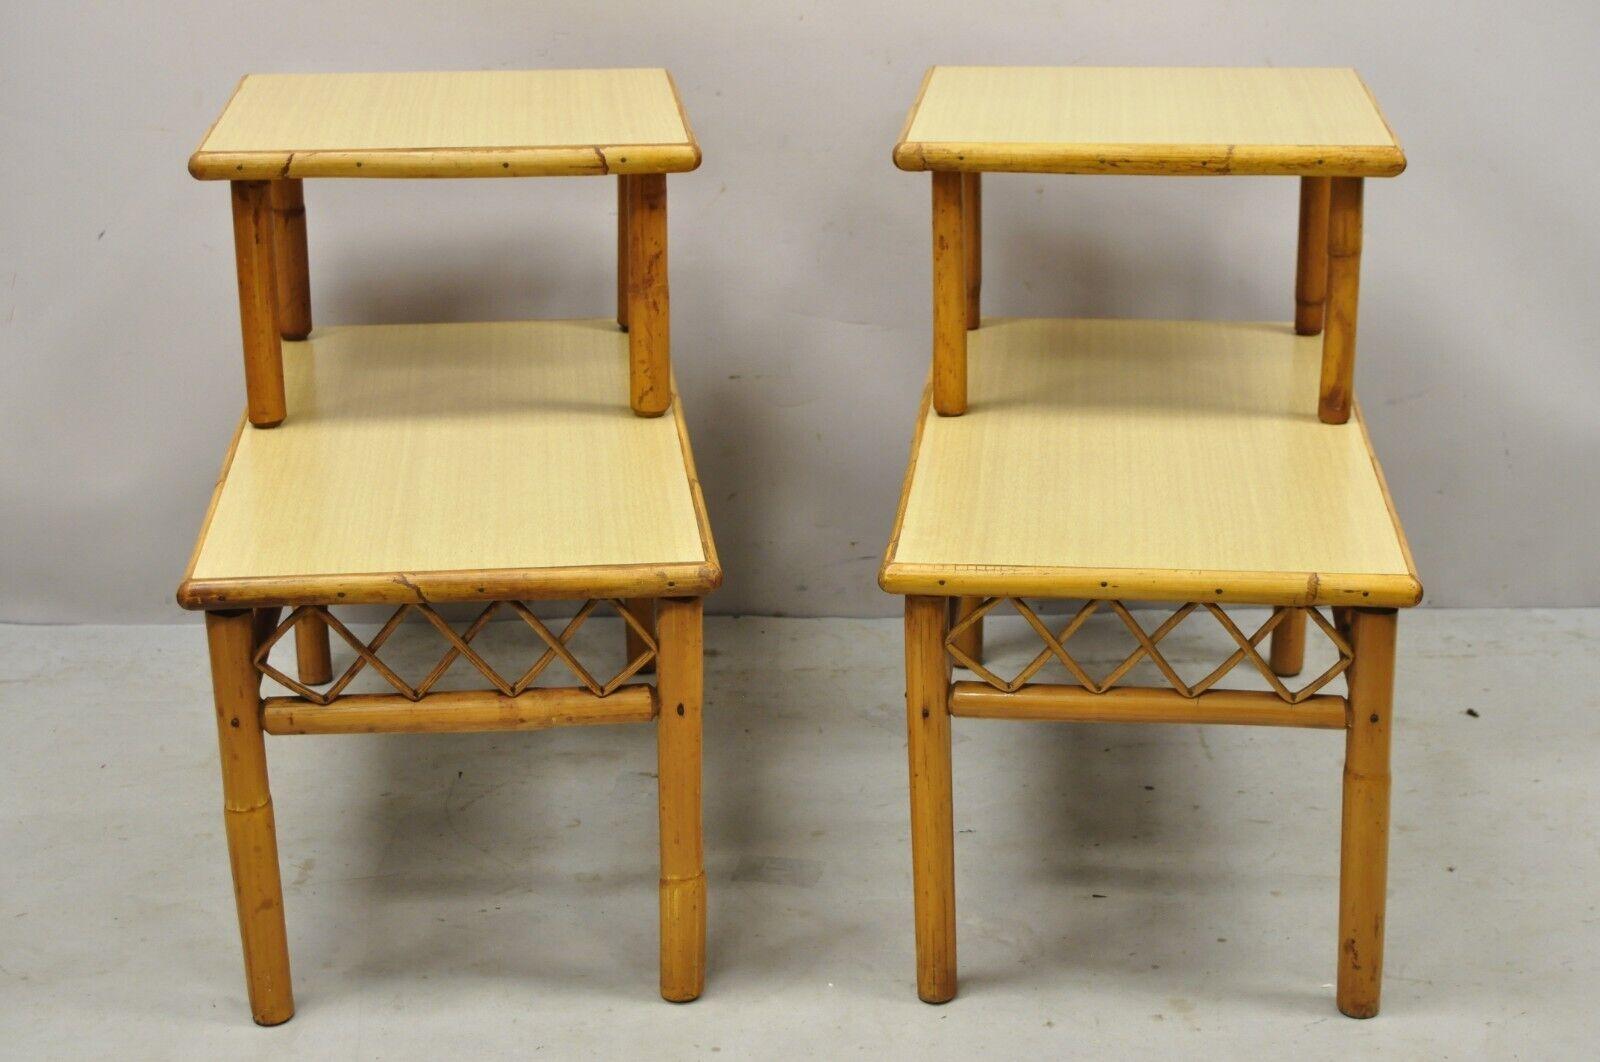 Vintage tiki rattan mid century bamboo step up end tables - a pair. Item featured has 2 tiers, bamboo wood frame, laminate surfaces, very nice vintage set, clean modernist lines, great style and form. circa Mid-20th Century. Measurements: 23.5